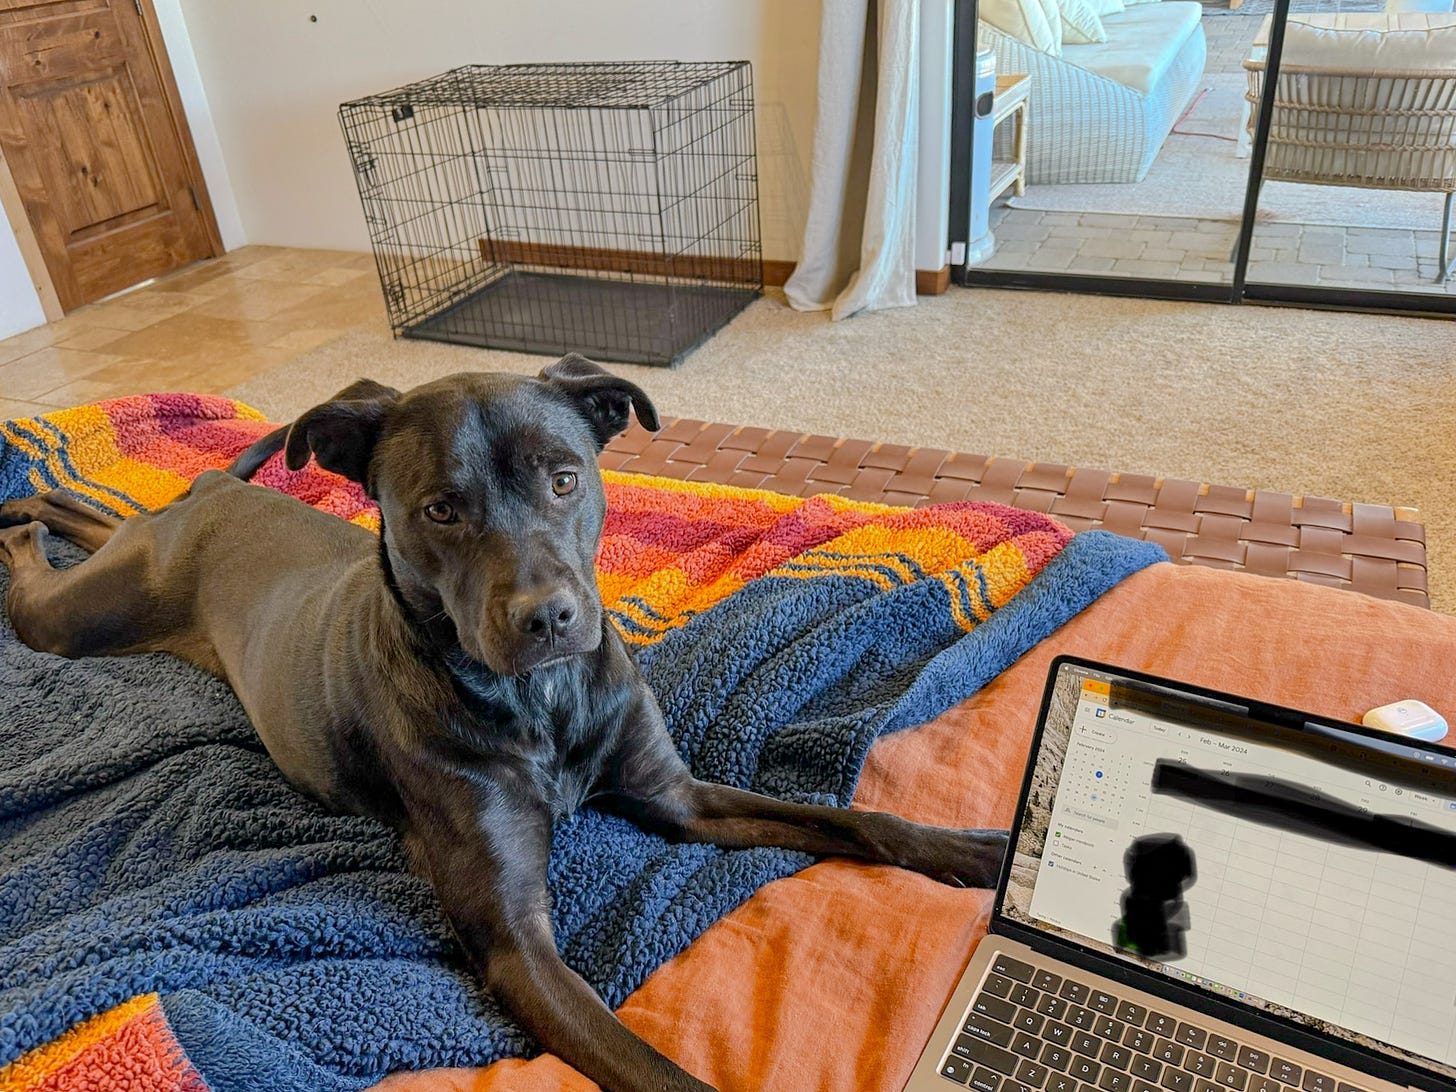 A black dog lays on a blue and orange blanket in a bedroom with her head up. She is looking at the camera, and there is a laptop with Google calendar open next to her.